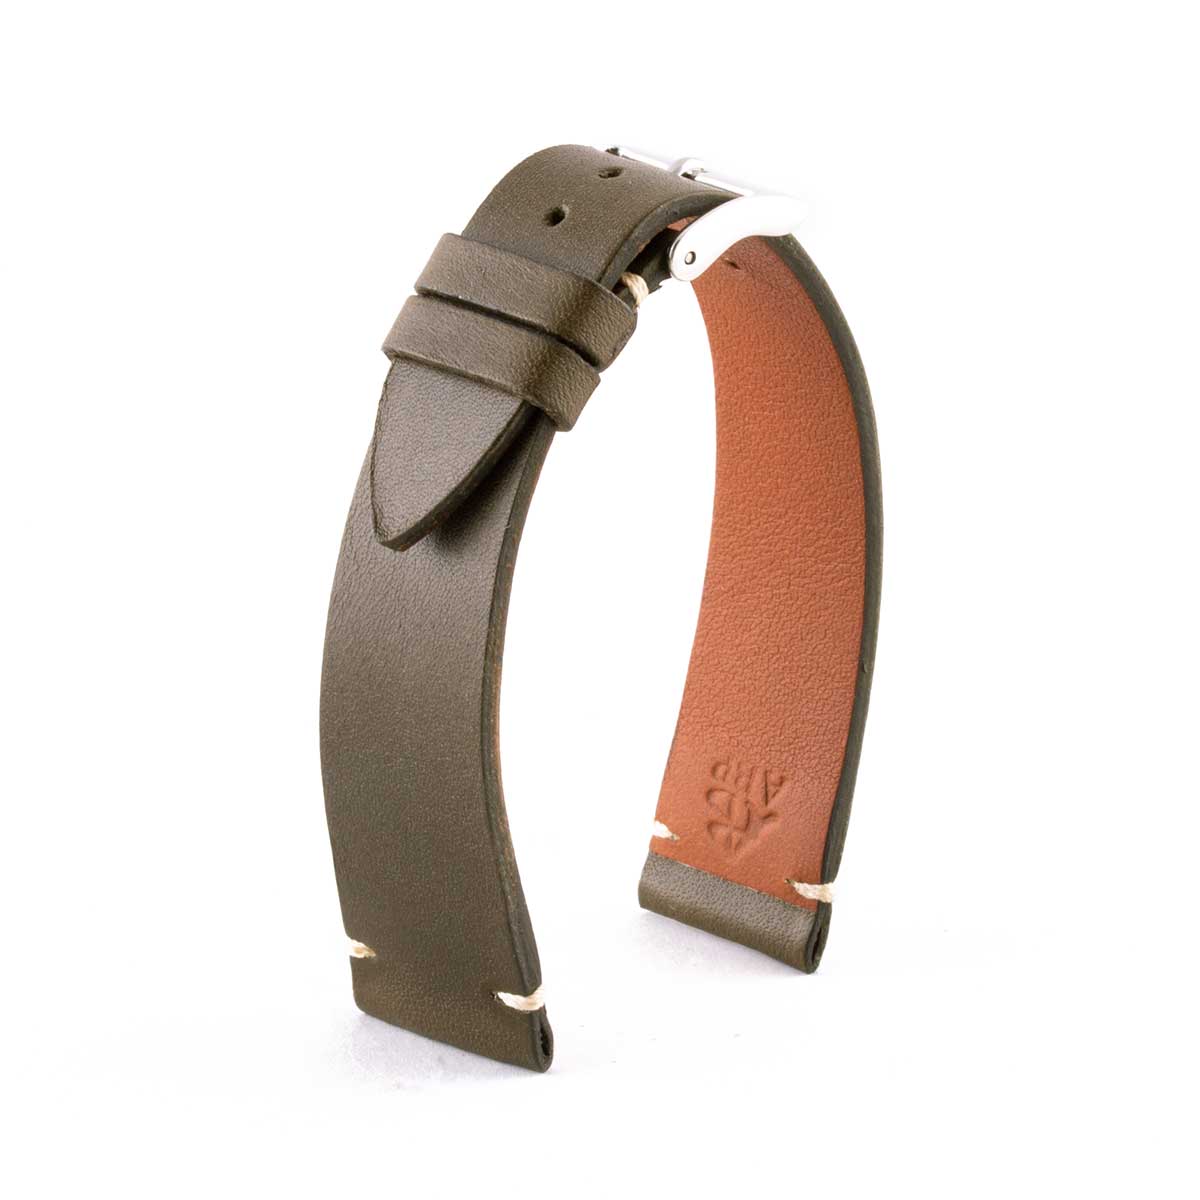 Light Tan Leather Strap with Yellow Stitching for Louis Vuitton